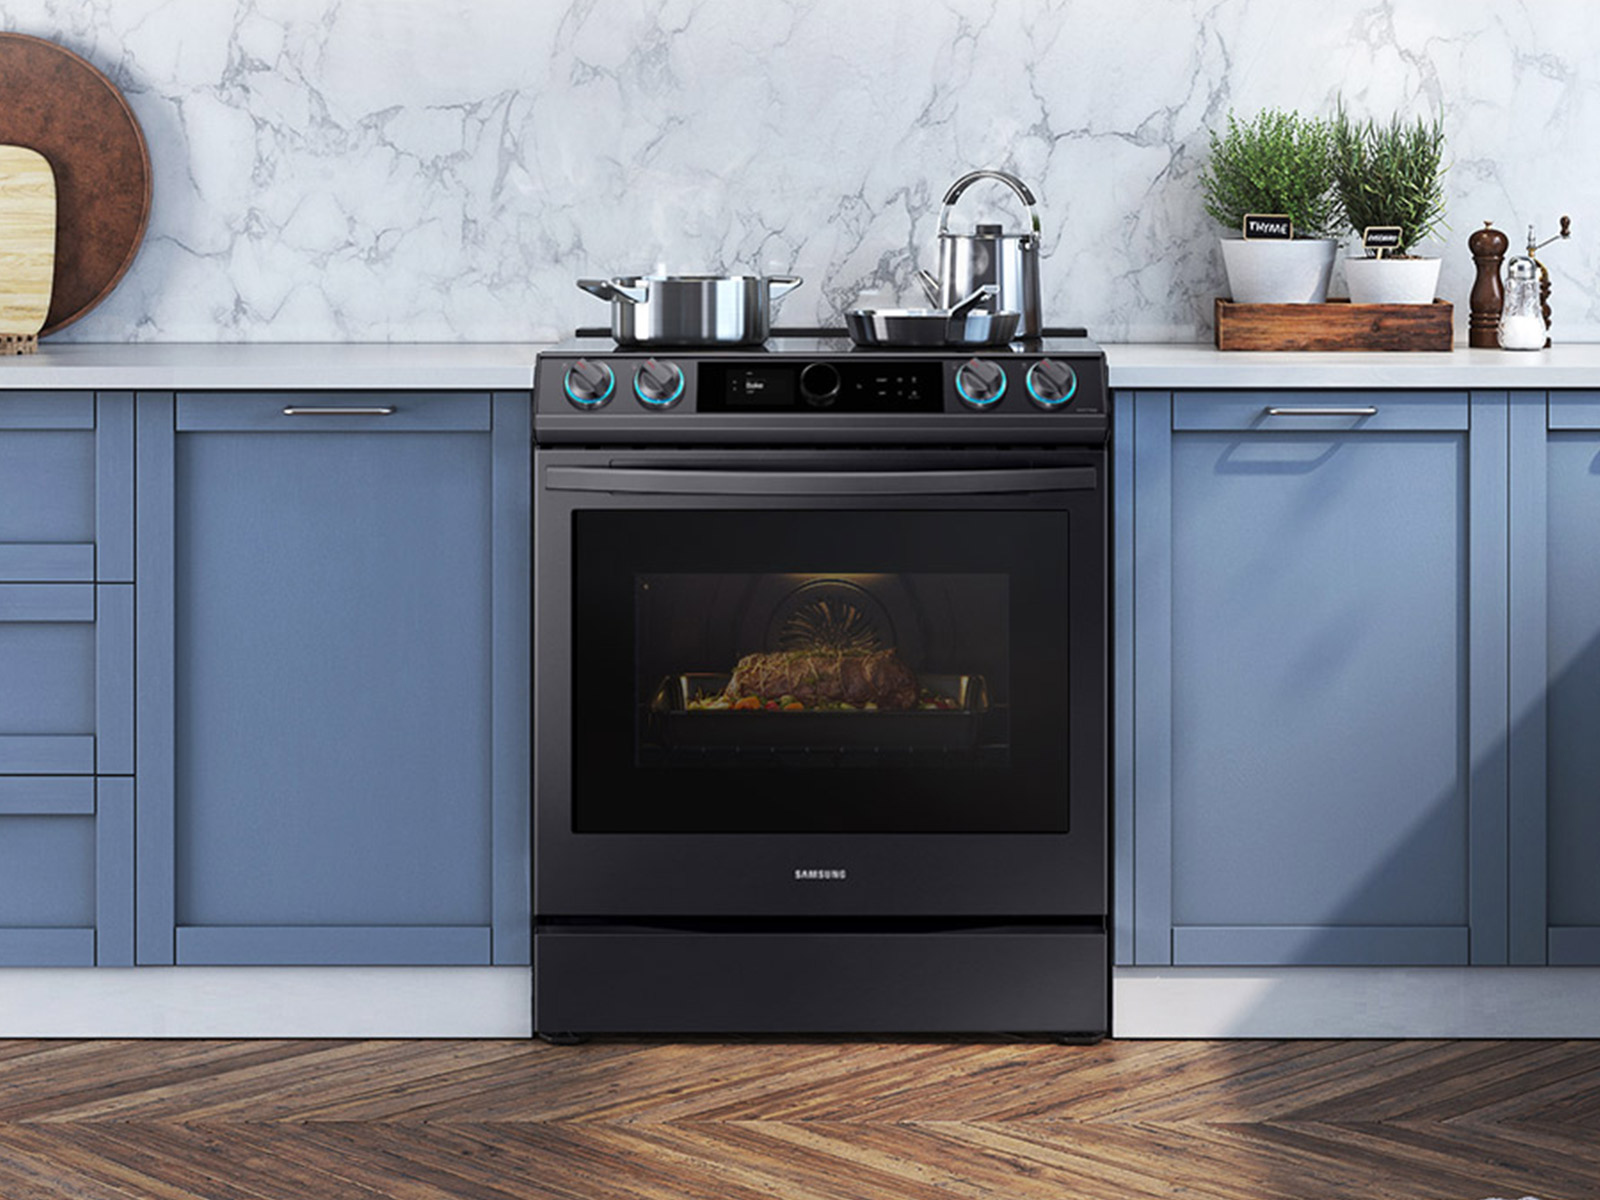 Thumbnail image of 6.3 cu. ft. Smart Slide-in Induction Range with Smart Dial & Air Fry in Black Stainless Steel